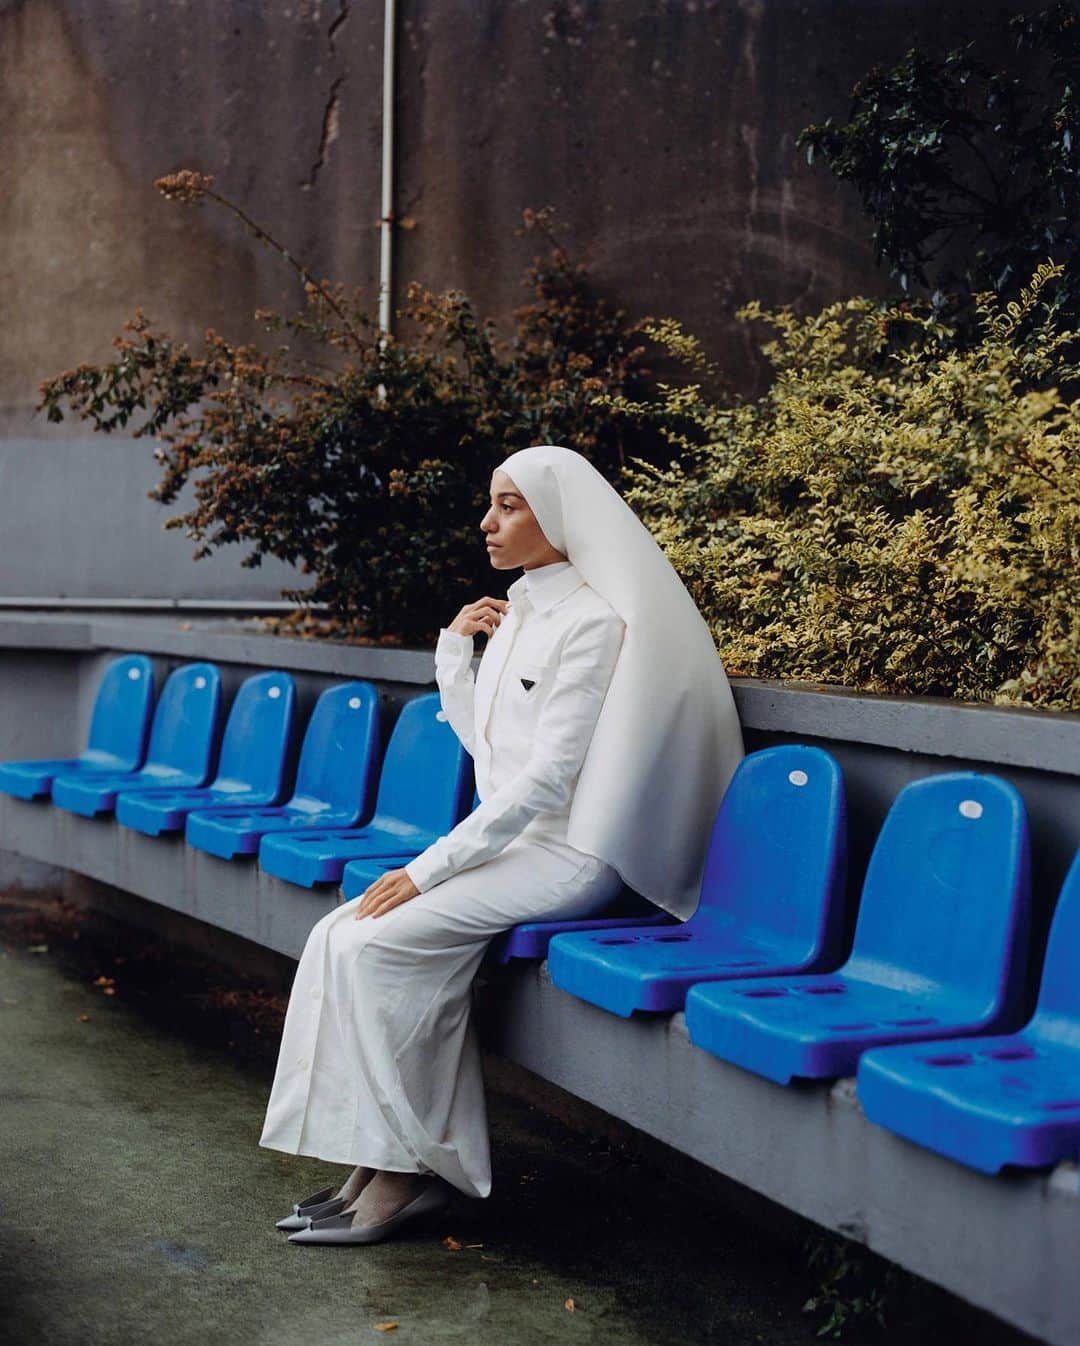 Dazed Magazineのインスタグラム：「The French state’s efforts to defend women’s rights and prevent ‘separatism’ while further entrenching the ban on the hijab and other religiously affiliated clothing, are entirely self-defeating. All credit is due to the Muslim women and girls who have chosen to stake their own claim to Frenchness 🙌  “The media talks about the hijab all the time. It’s broadcasting news all day, often platforming the extreme right. There’s not a single day you don’t hear about Arabs, Muslims or immigrants on the news. But the media is portraying a version of us that doesn’t exist.” — Salimata Sylla   “We’re still going to fight, we’re not going to let it go. We have more and more girls that join us every day. This is just the beginning.”   Tap the link in bio to explore more 🔗  Featuring Founé Diawara, Hawa Doucouré, and Yousra of @leshijabeuses, Salimata Sylla @sali_7, Loubna Reguig loubnarchives, Ania Khelaf @ania.tayri, Sarah B @saraahh.bni, Hiba Latreche @hibalat  Photography @gunsahma Styling @omaimasss Hair @oummy_youssoufa Make-up @minkimmakeup Production @wagmbh Post Production @_thehandofgod  Text @tiara.sahar  Editor-in-Chief @ibkamara Art Director @gareth_wrighton Editorial Director @kaci0n Fashion Director @imruh  1. Ania wears gabardine dress and leather pumps @prada, cotton bodysuit worn underneath @wolford. 2. From left: Salimata wears technical moiré coat @dior, cotton bodysuit worn underneath @wolford. Loubna wears all clothes @maisonalaia. Hiba wears scuba and silk dress @gucci, hooded top worn underneath @marineserre_official. 3. Founé wears technical silk dress @balenciaga. 4. Sarah wears spandex dress @maisonjsimone. 5. Hawa wears silk top @ysl by @anthonyvaccarello. 6. From left: Hawa wears all clothes @ysl by @anthonyvaccarello. Founé wears technical silk dress, spandex panta-boots @balenciaga. Yousra wears recycled polyester dress @cfcl_official, cotton bodysuit worn underneath @wolford, wool pleated Burça @burcakyol. 7. Founé wears technical silk dress @balenciaga. 8. Hawa wears all clothes @ysl by @anthonyvaccarello. 9. Hiba wears hooded top @marineserre_official.  Taken from the winter 2023 #THEBADDIEISSUE of #Dazed」